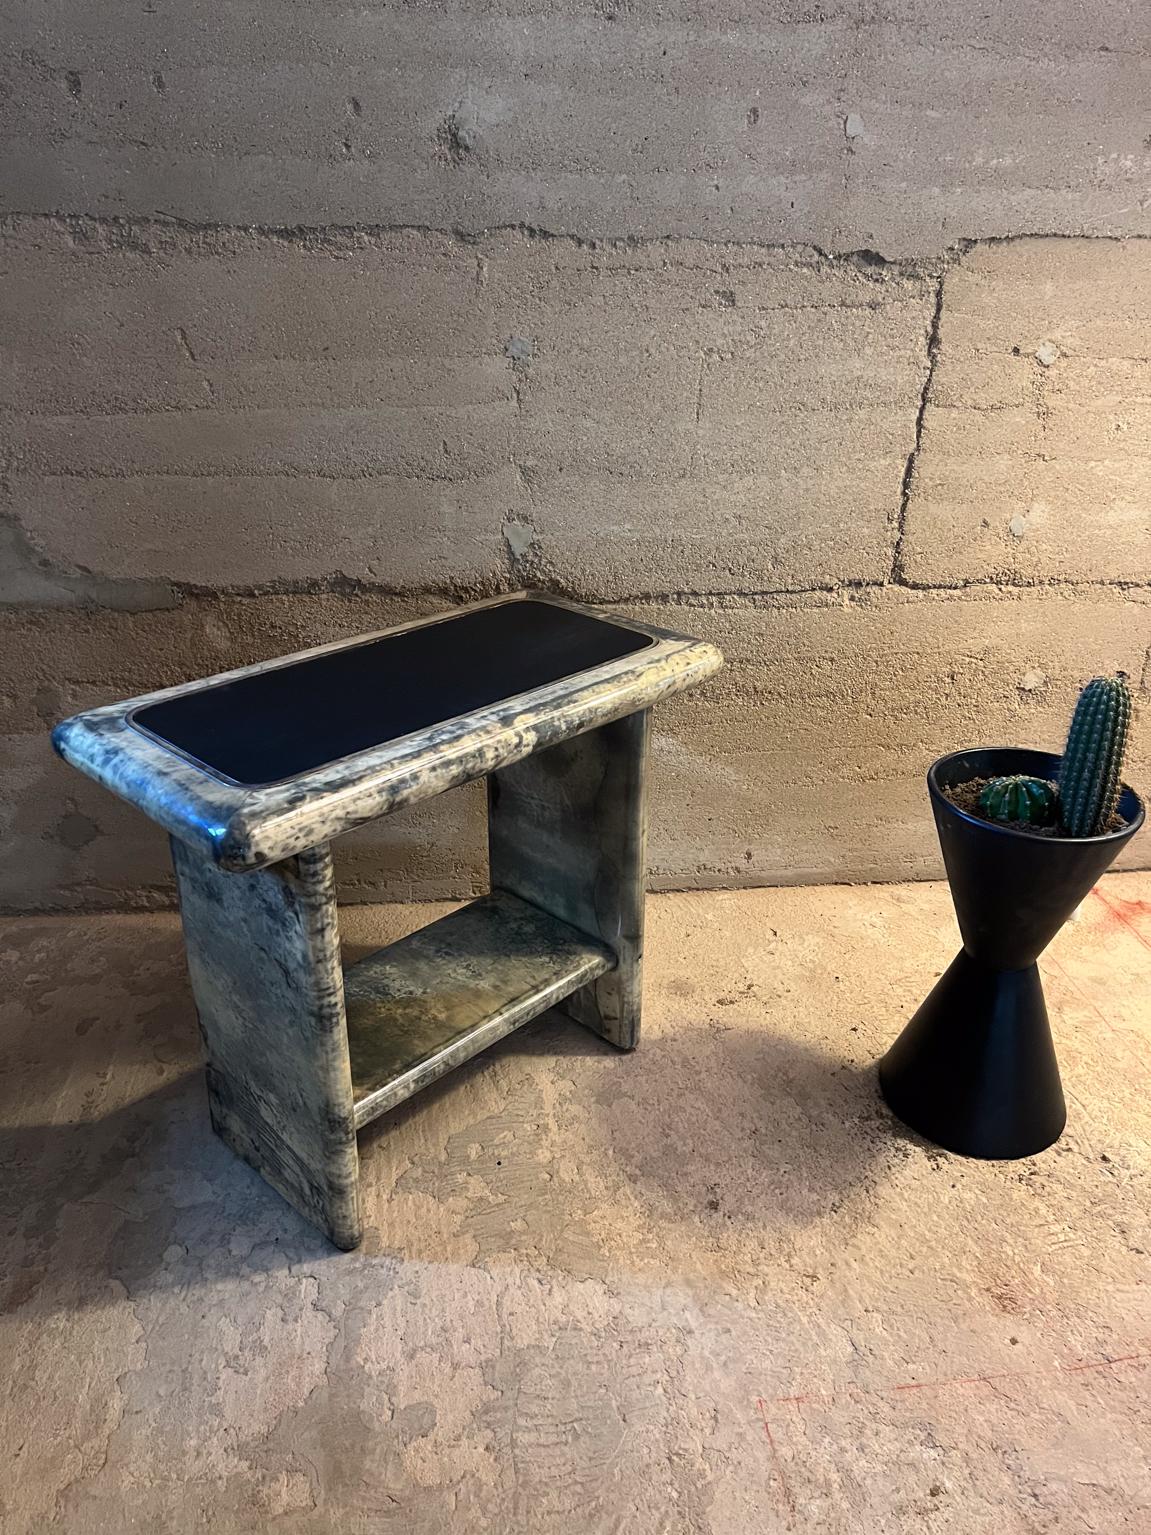 1960s Arturo Pani rectangular Side Tables in patinated brass, lacquered goatskin and leather. 
Goatskin displays color tan to dark gray. 
Tabletop is black leather with brass detail.
Unmarked attributed to Arturo Pani Mexico City
26.38 H x 16.38 D x